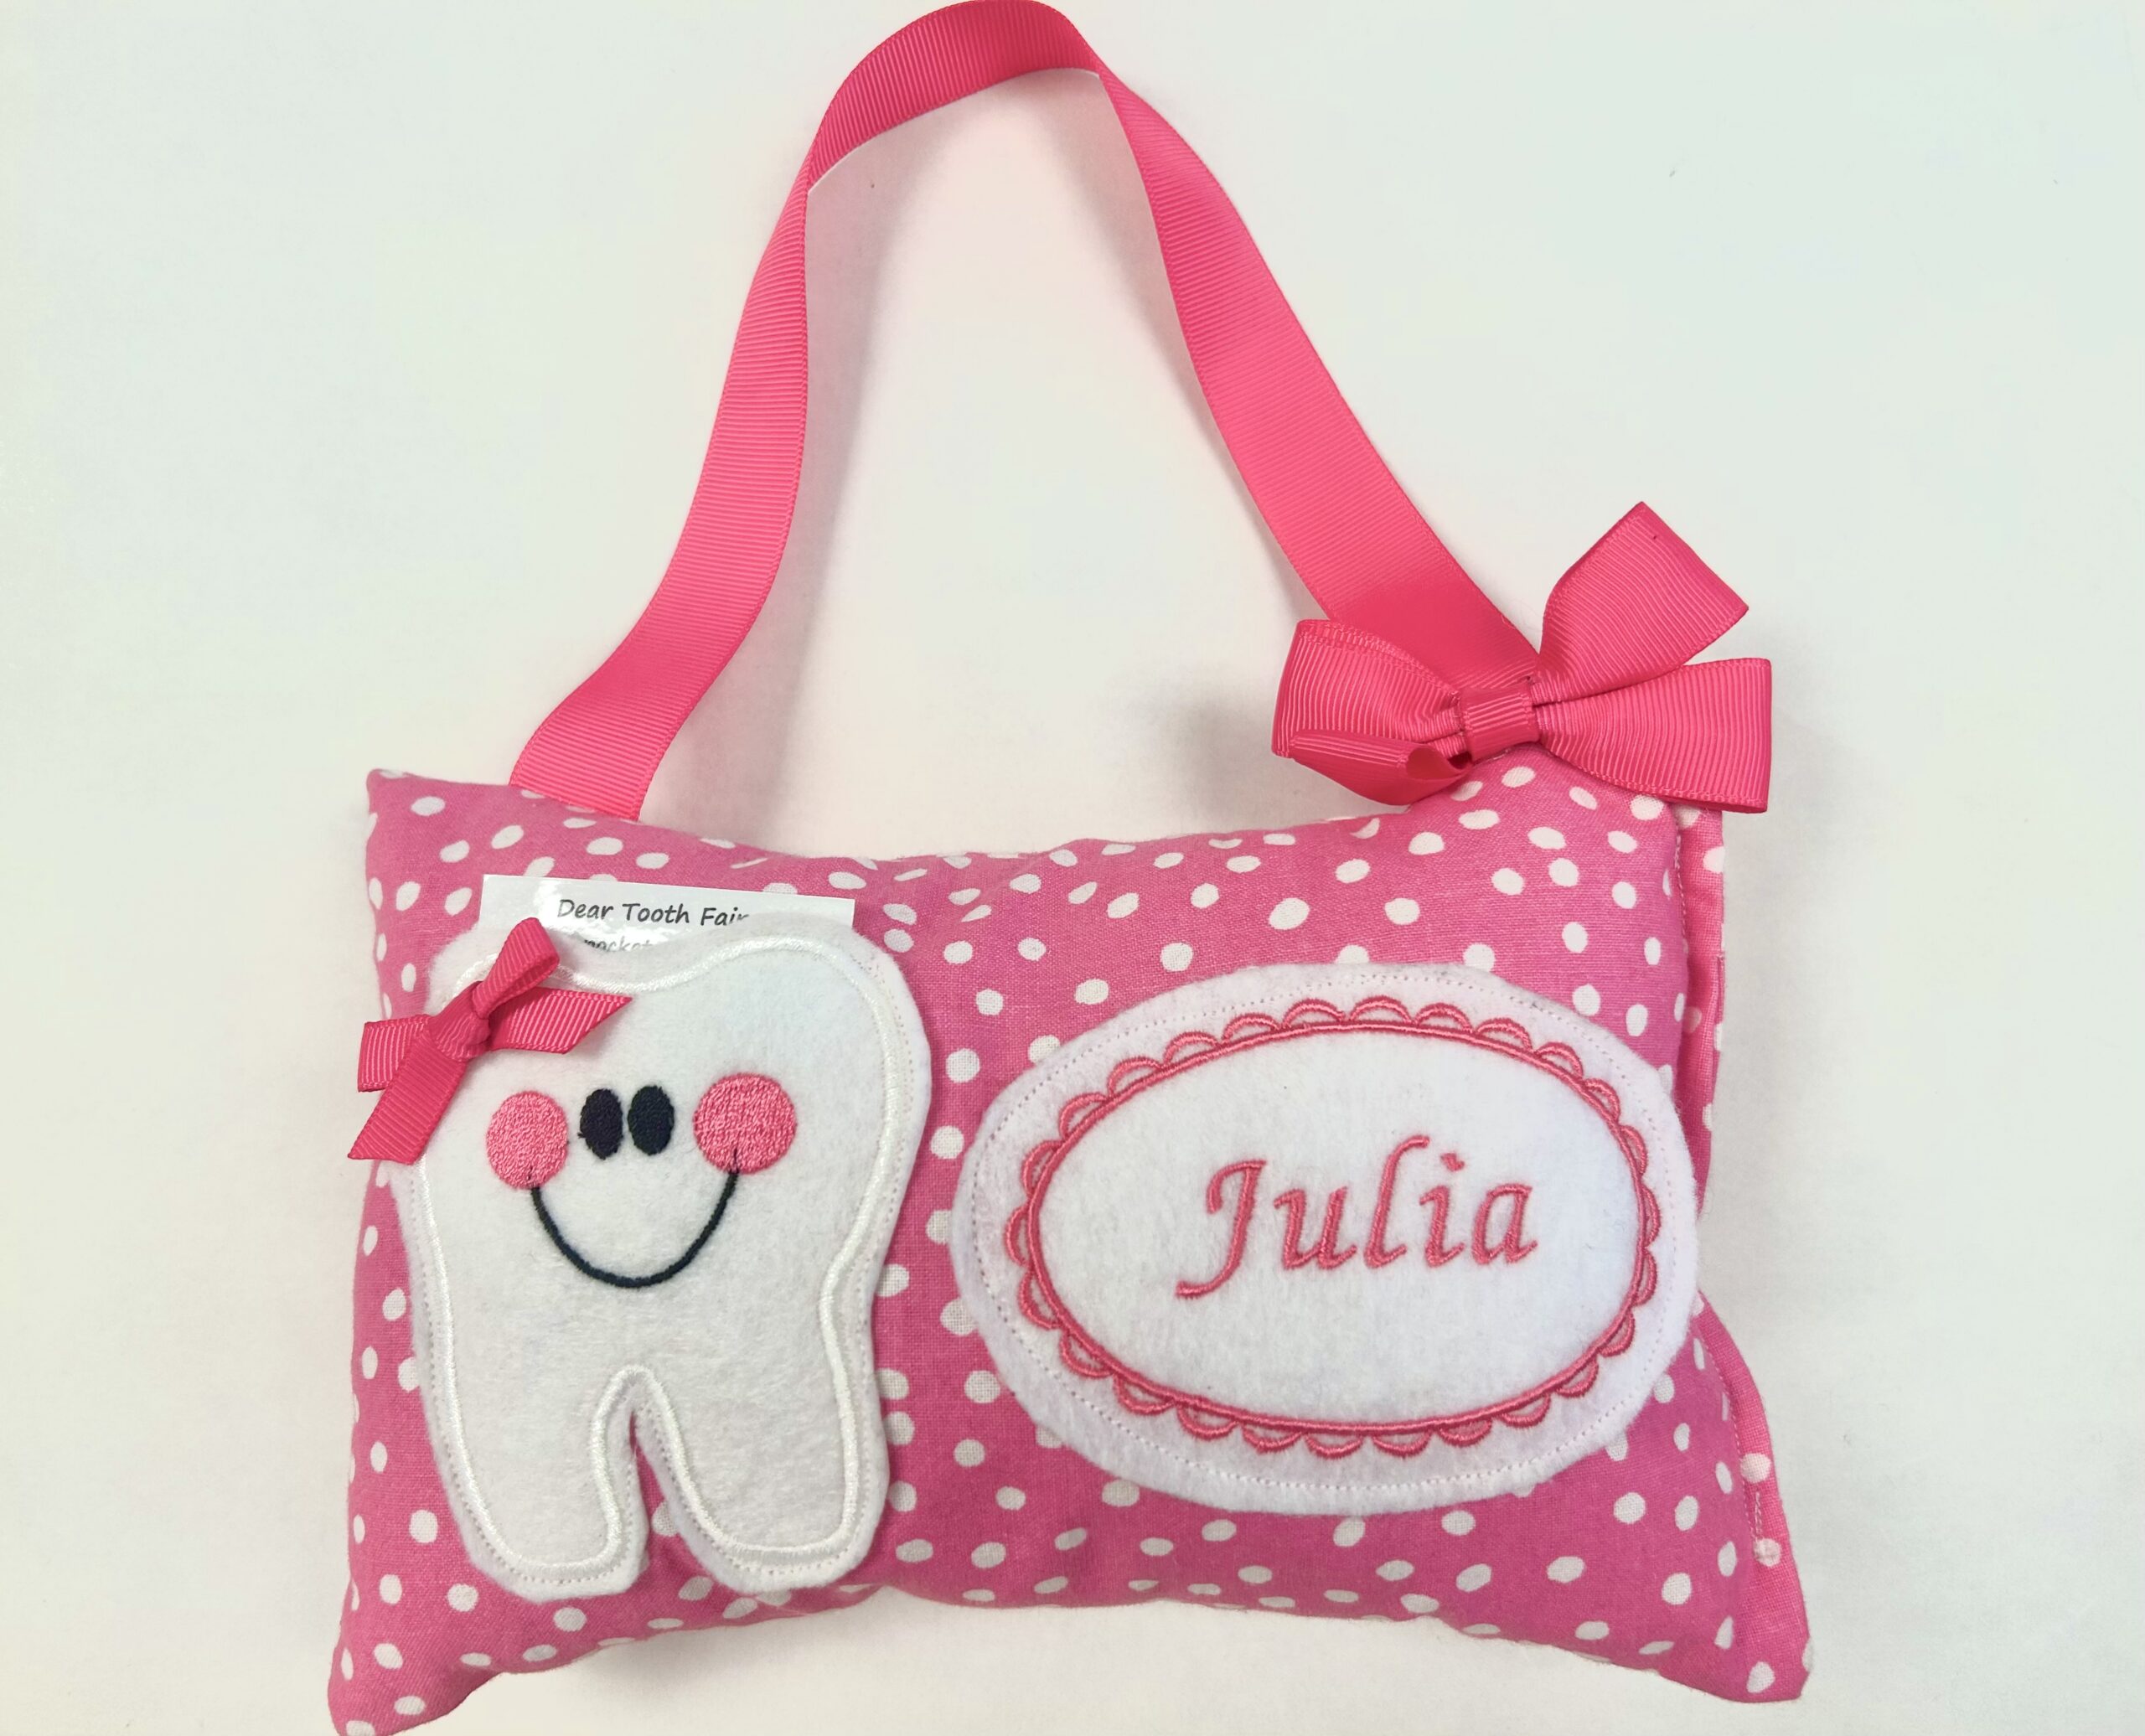 https://customstitch.com/wp-content/uploads/2023/05/tooth-fairy-pillow-scaled.jpg